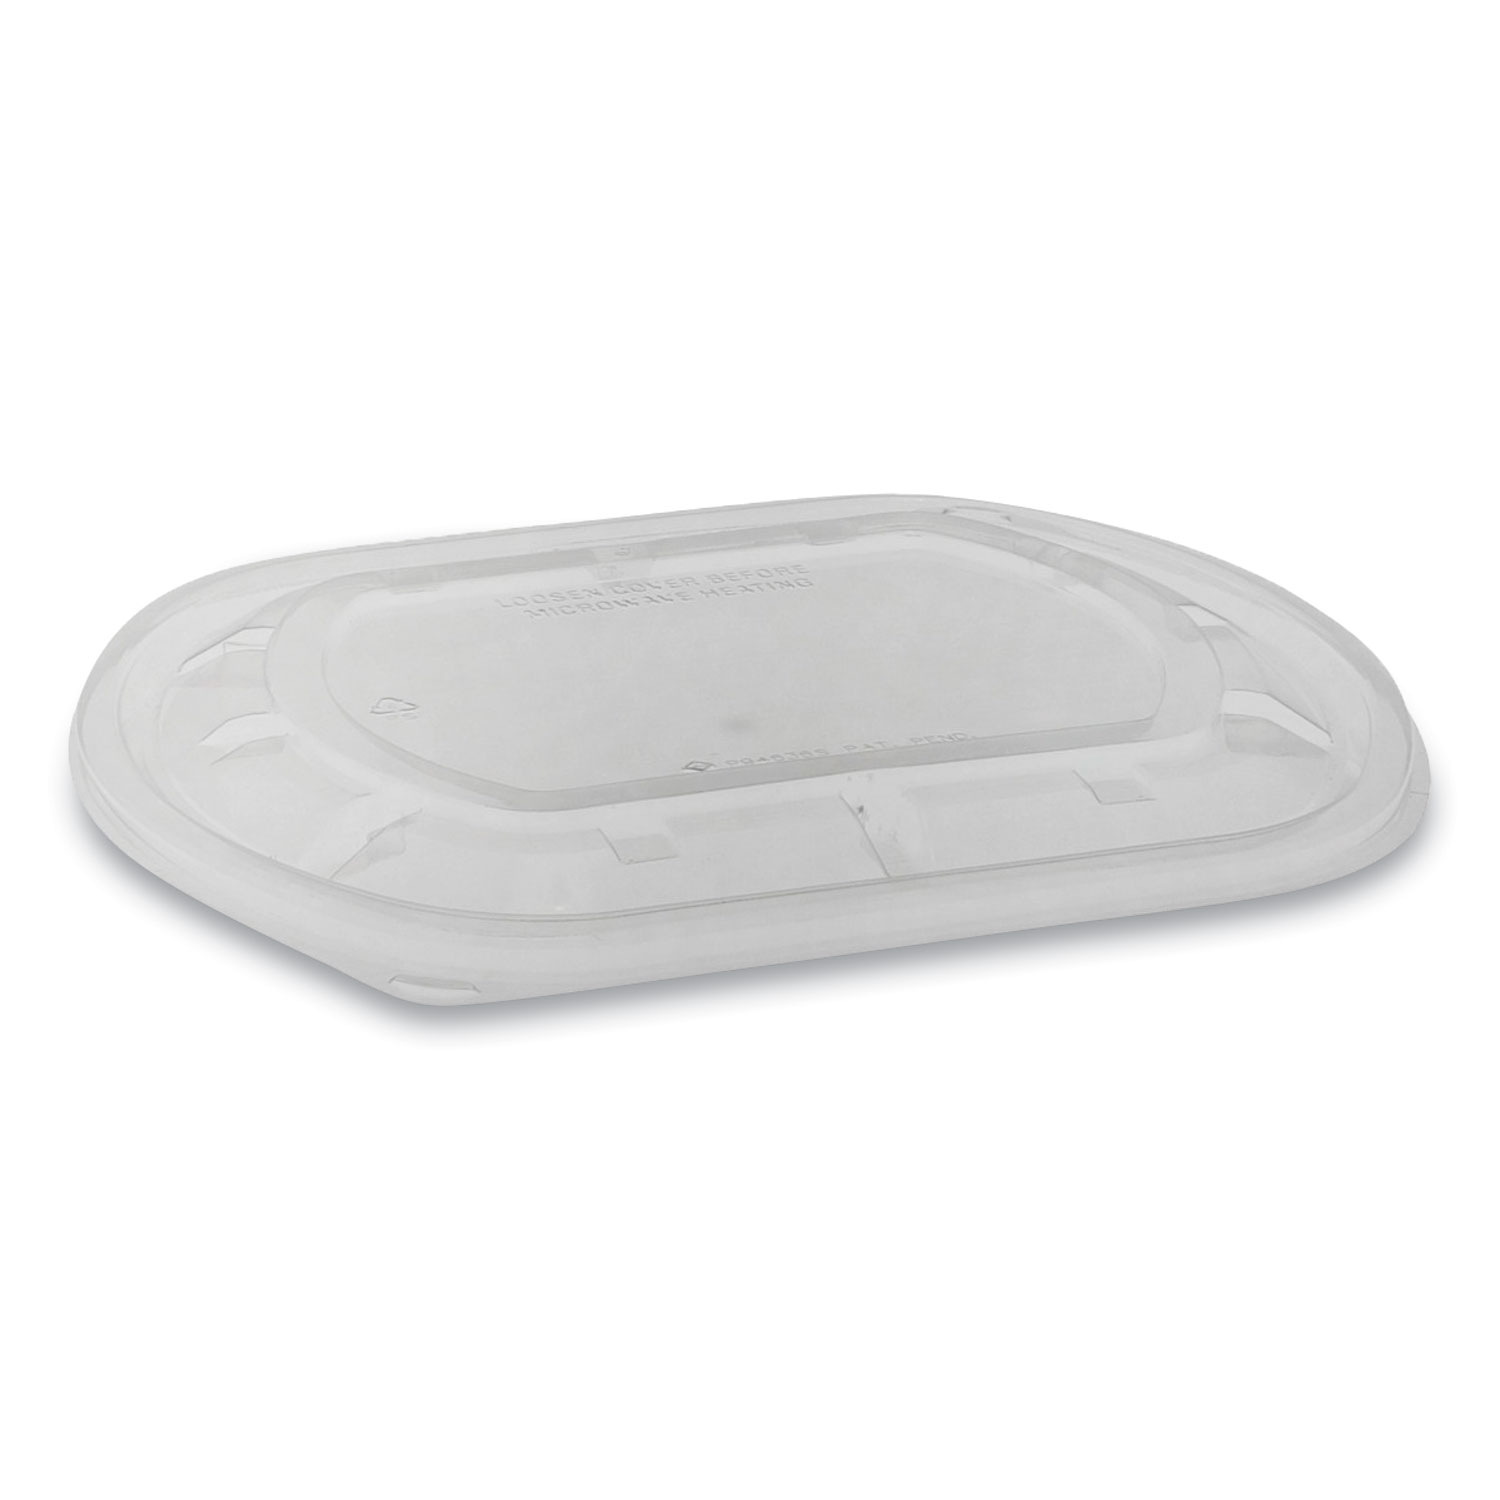 Pactiv ClearView MealMaster Lids with Fog Gard Coating, Large Flat Lid, 9.38 x 8 x 0.38, Clear, 300/Carton